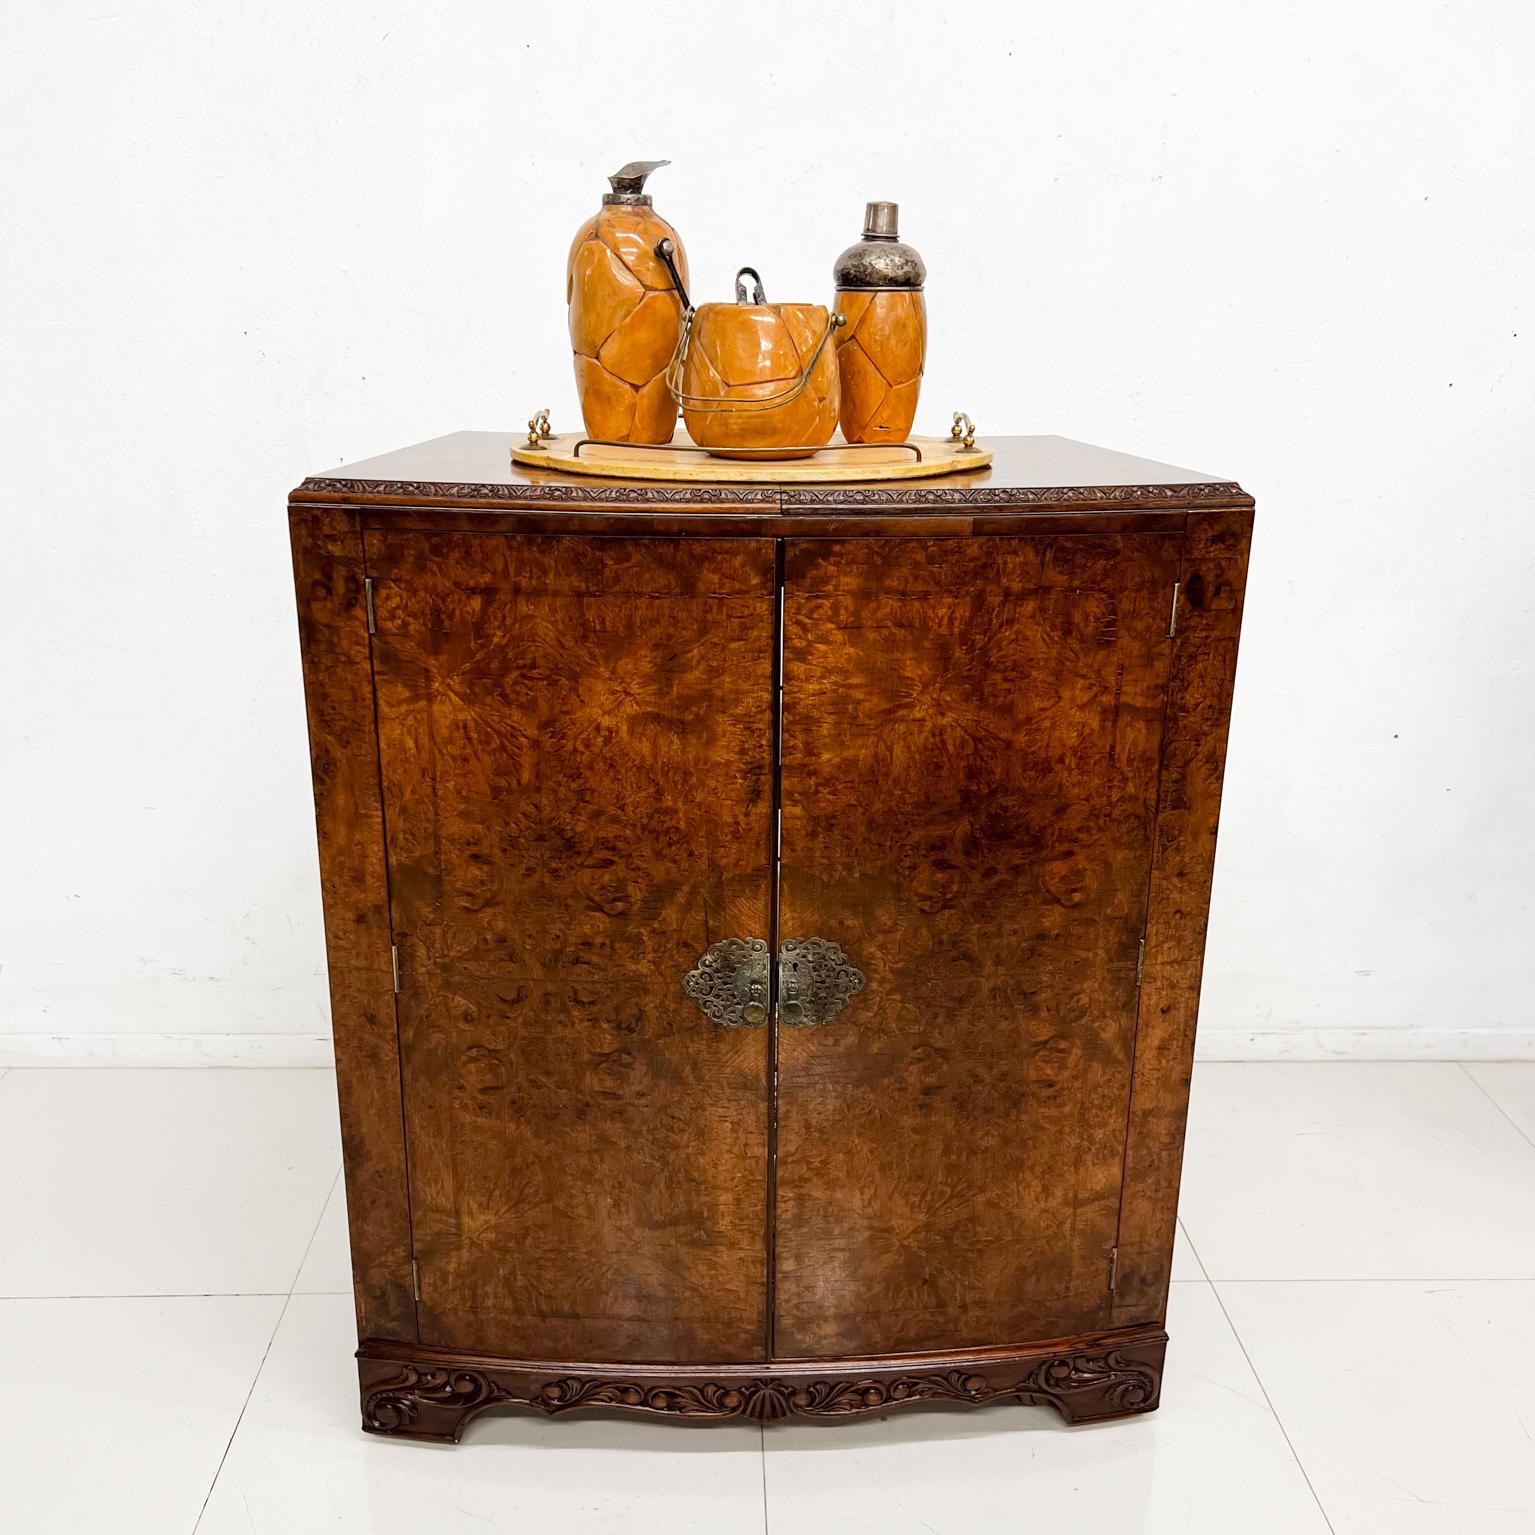 1930s Exquisite English Art Deco Cocktail Dry Bar Burlwood and Walnut 12